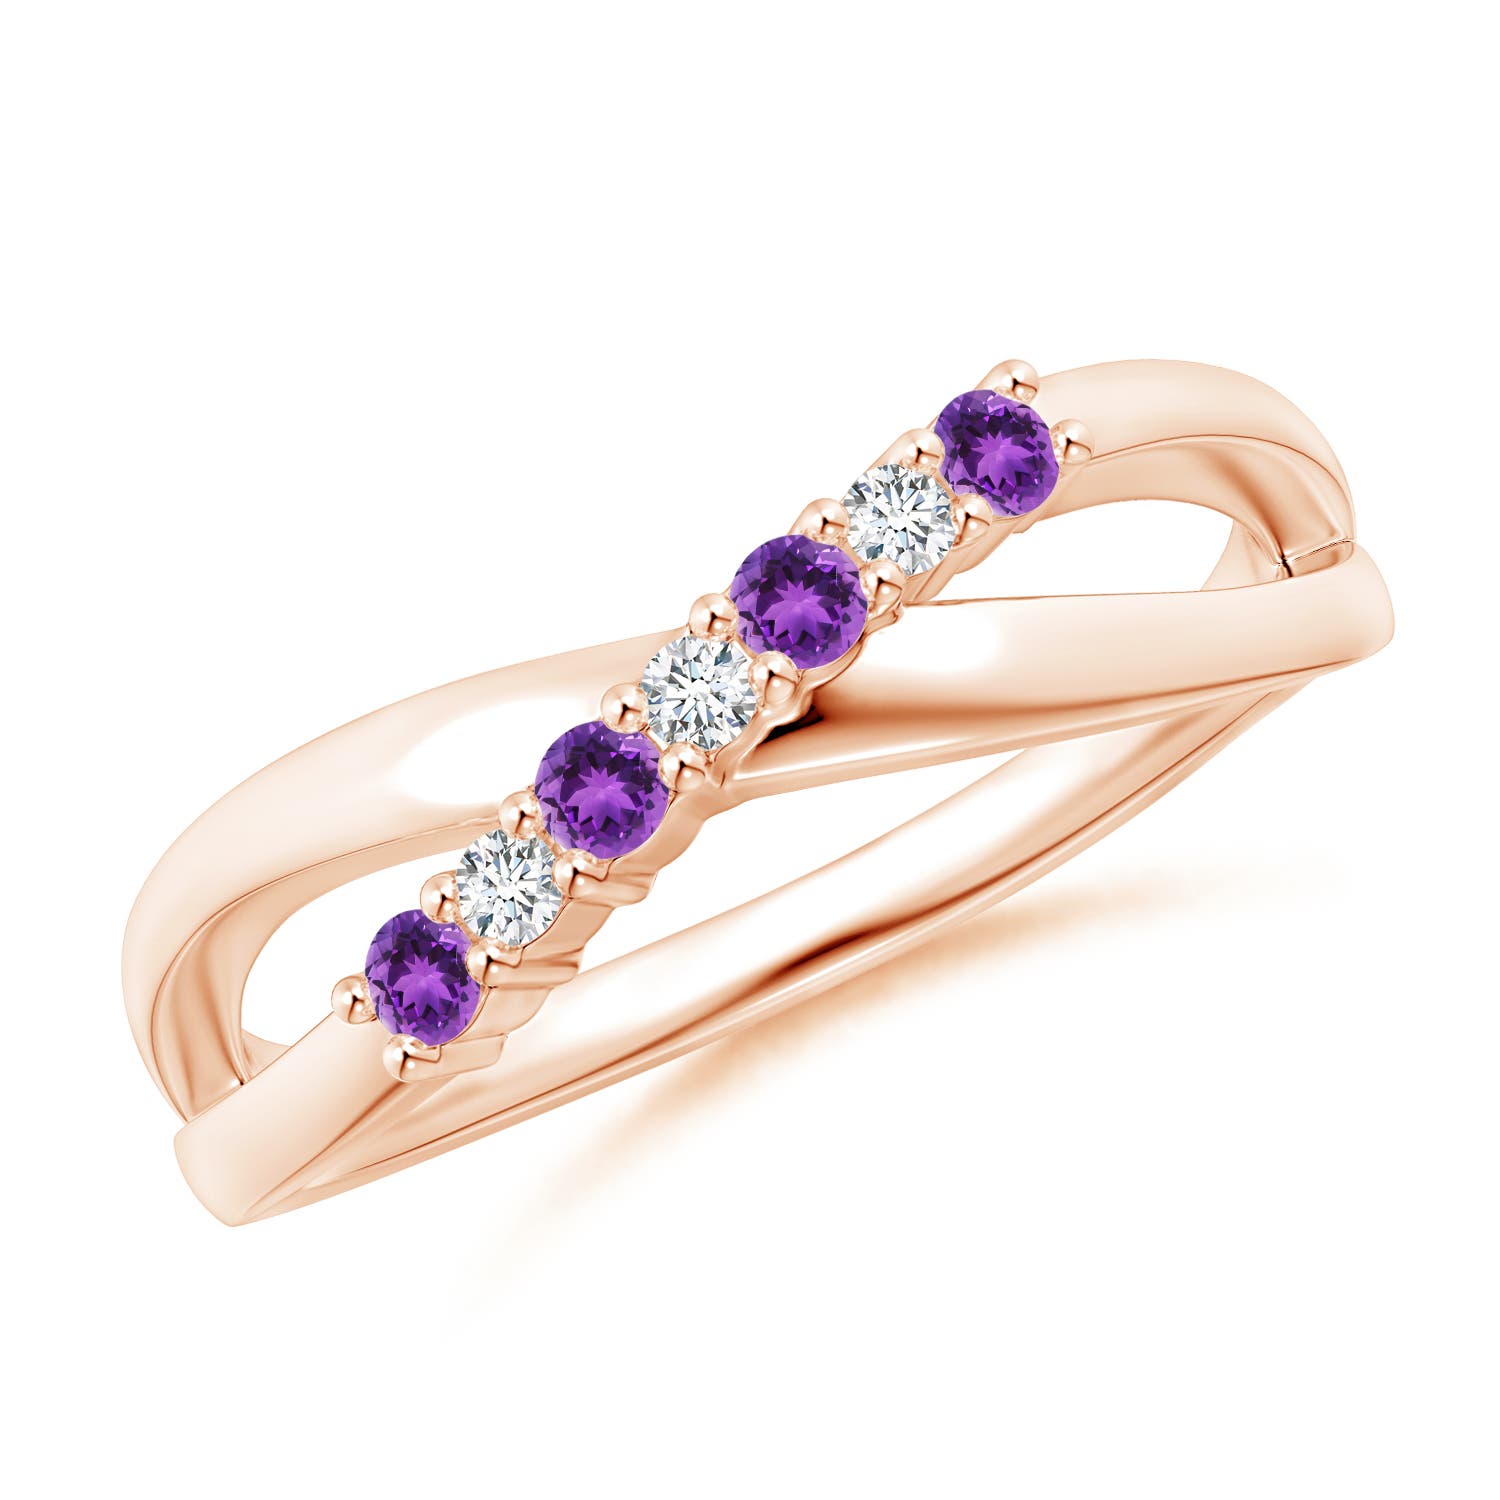 AAA - Amethyst / 0.18 CT / 14 KT Rose Gold